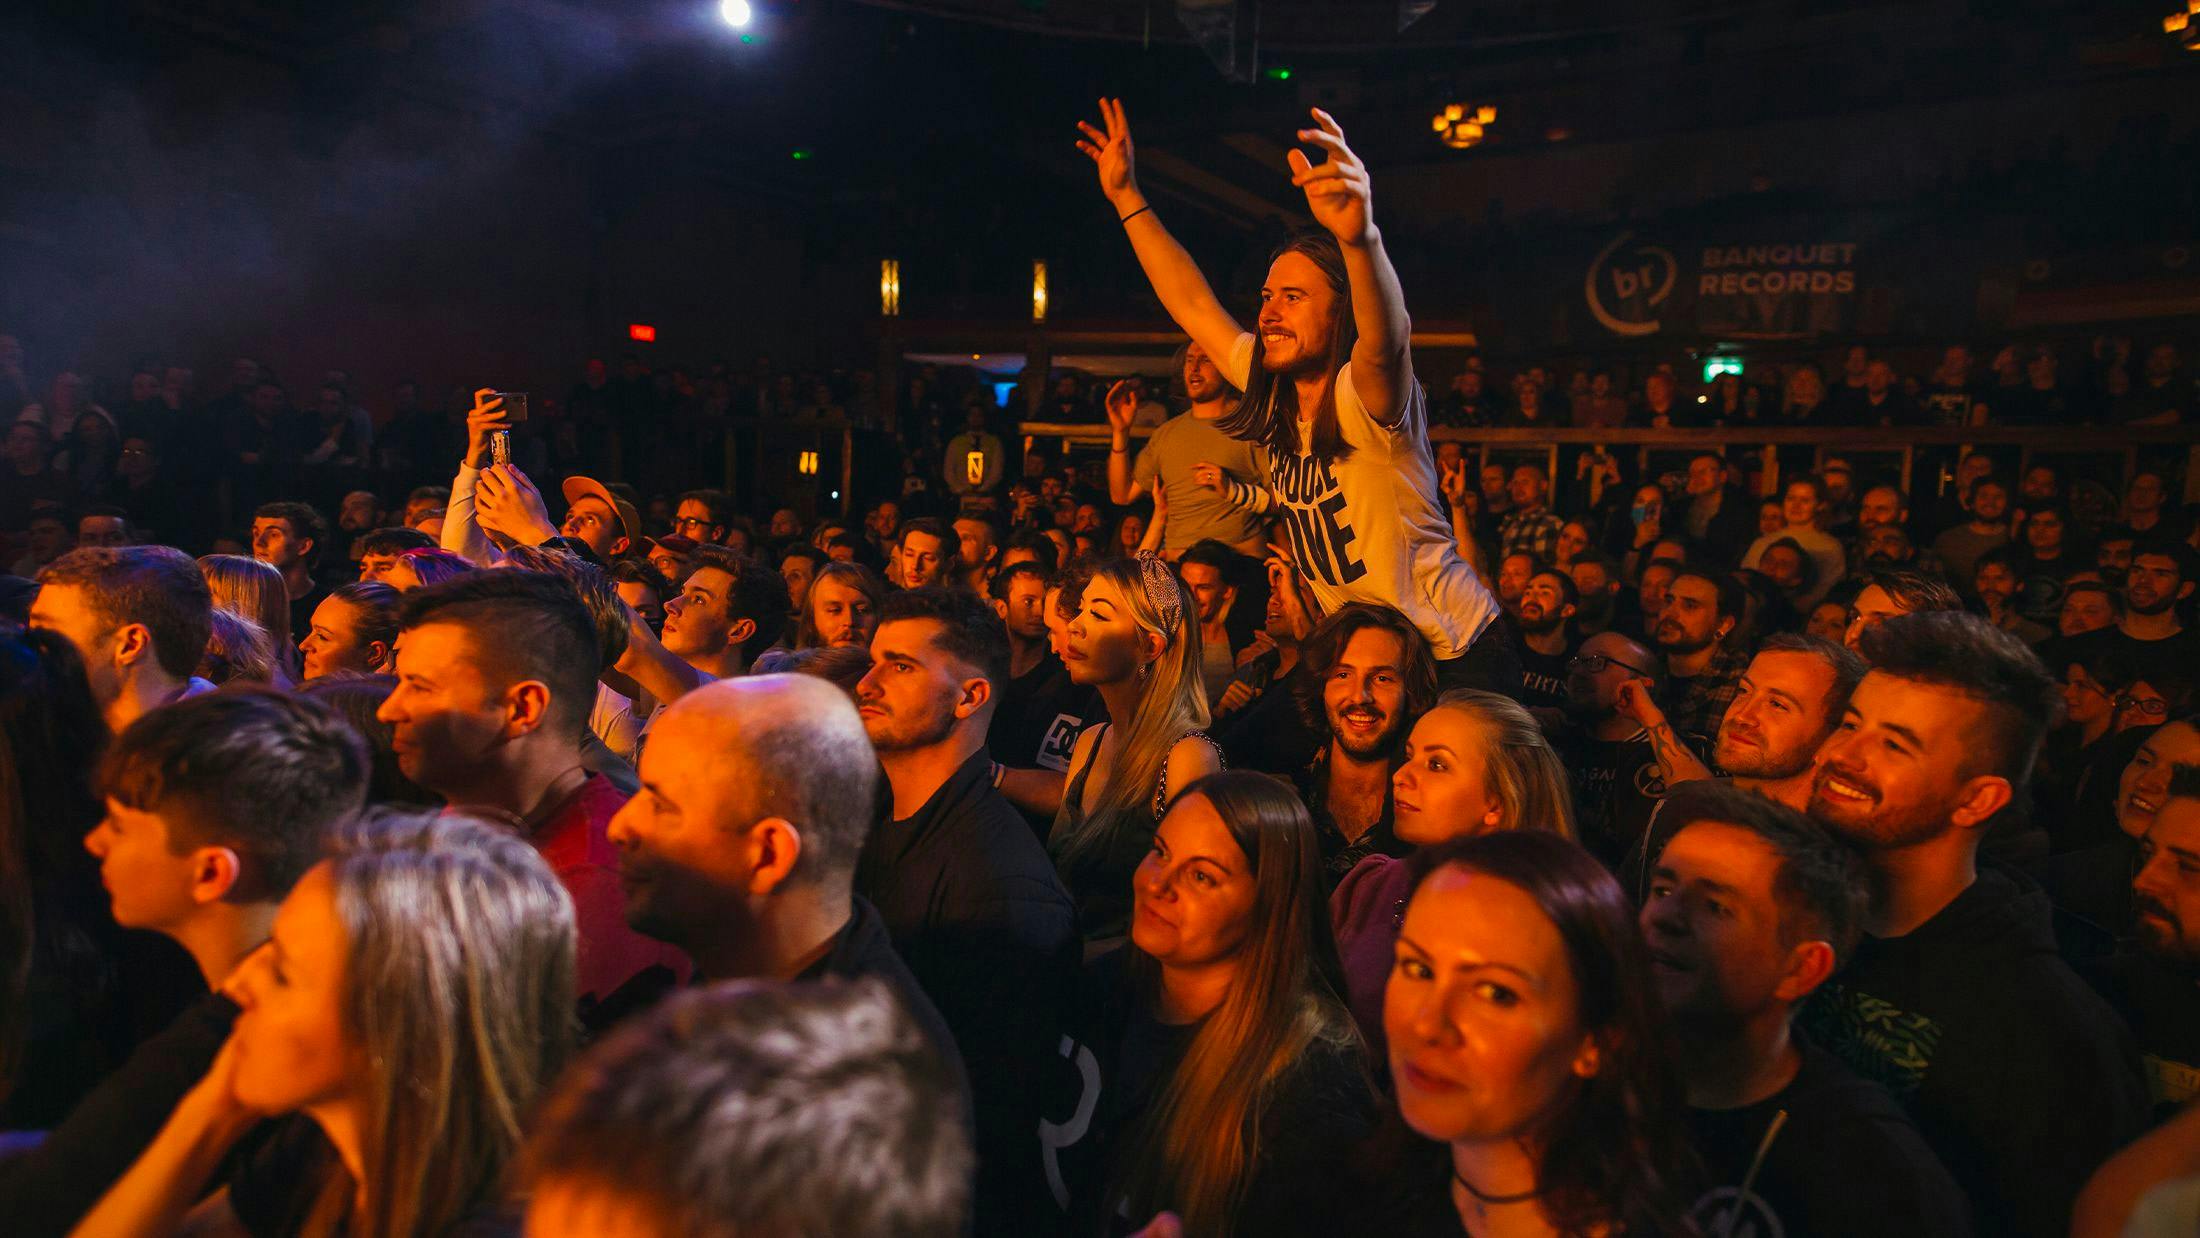 “When you lose independent venues, you lose a serious part of underground music culture”